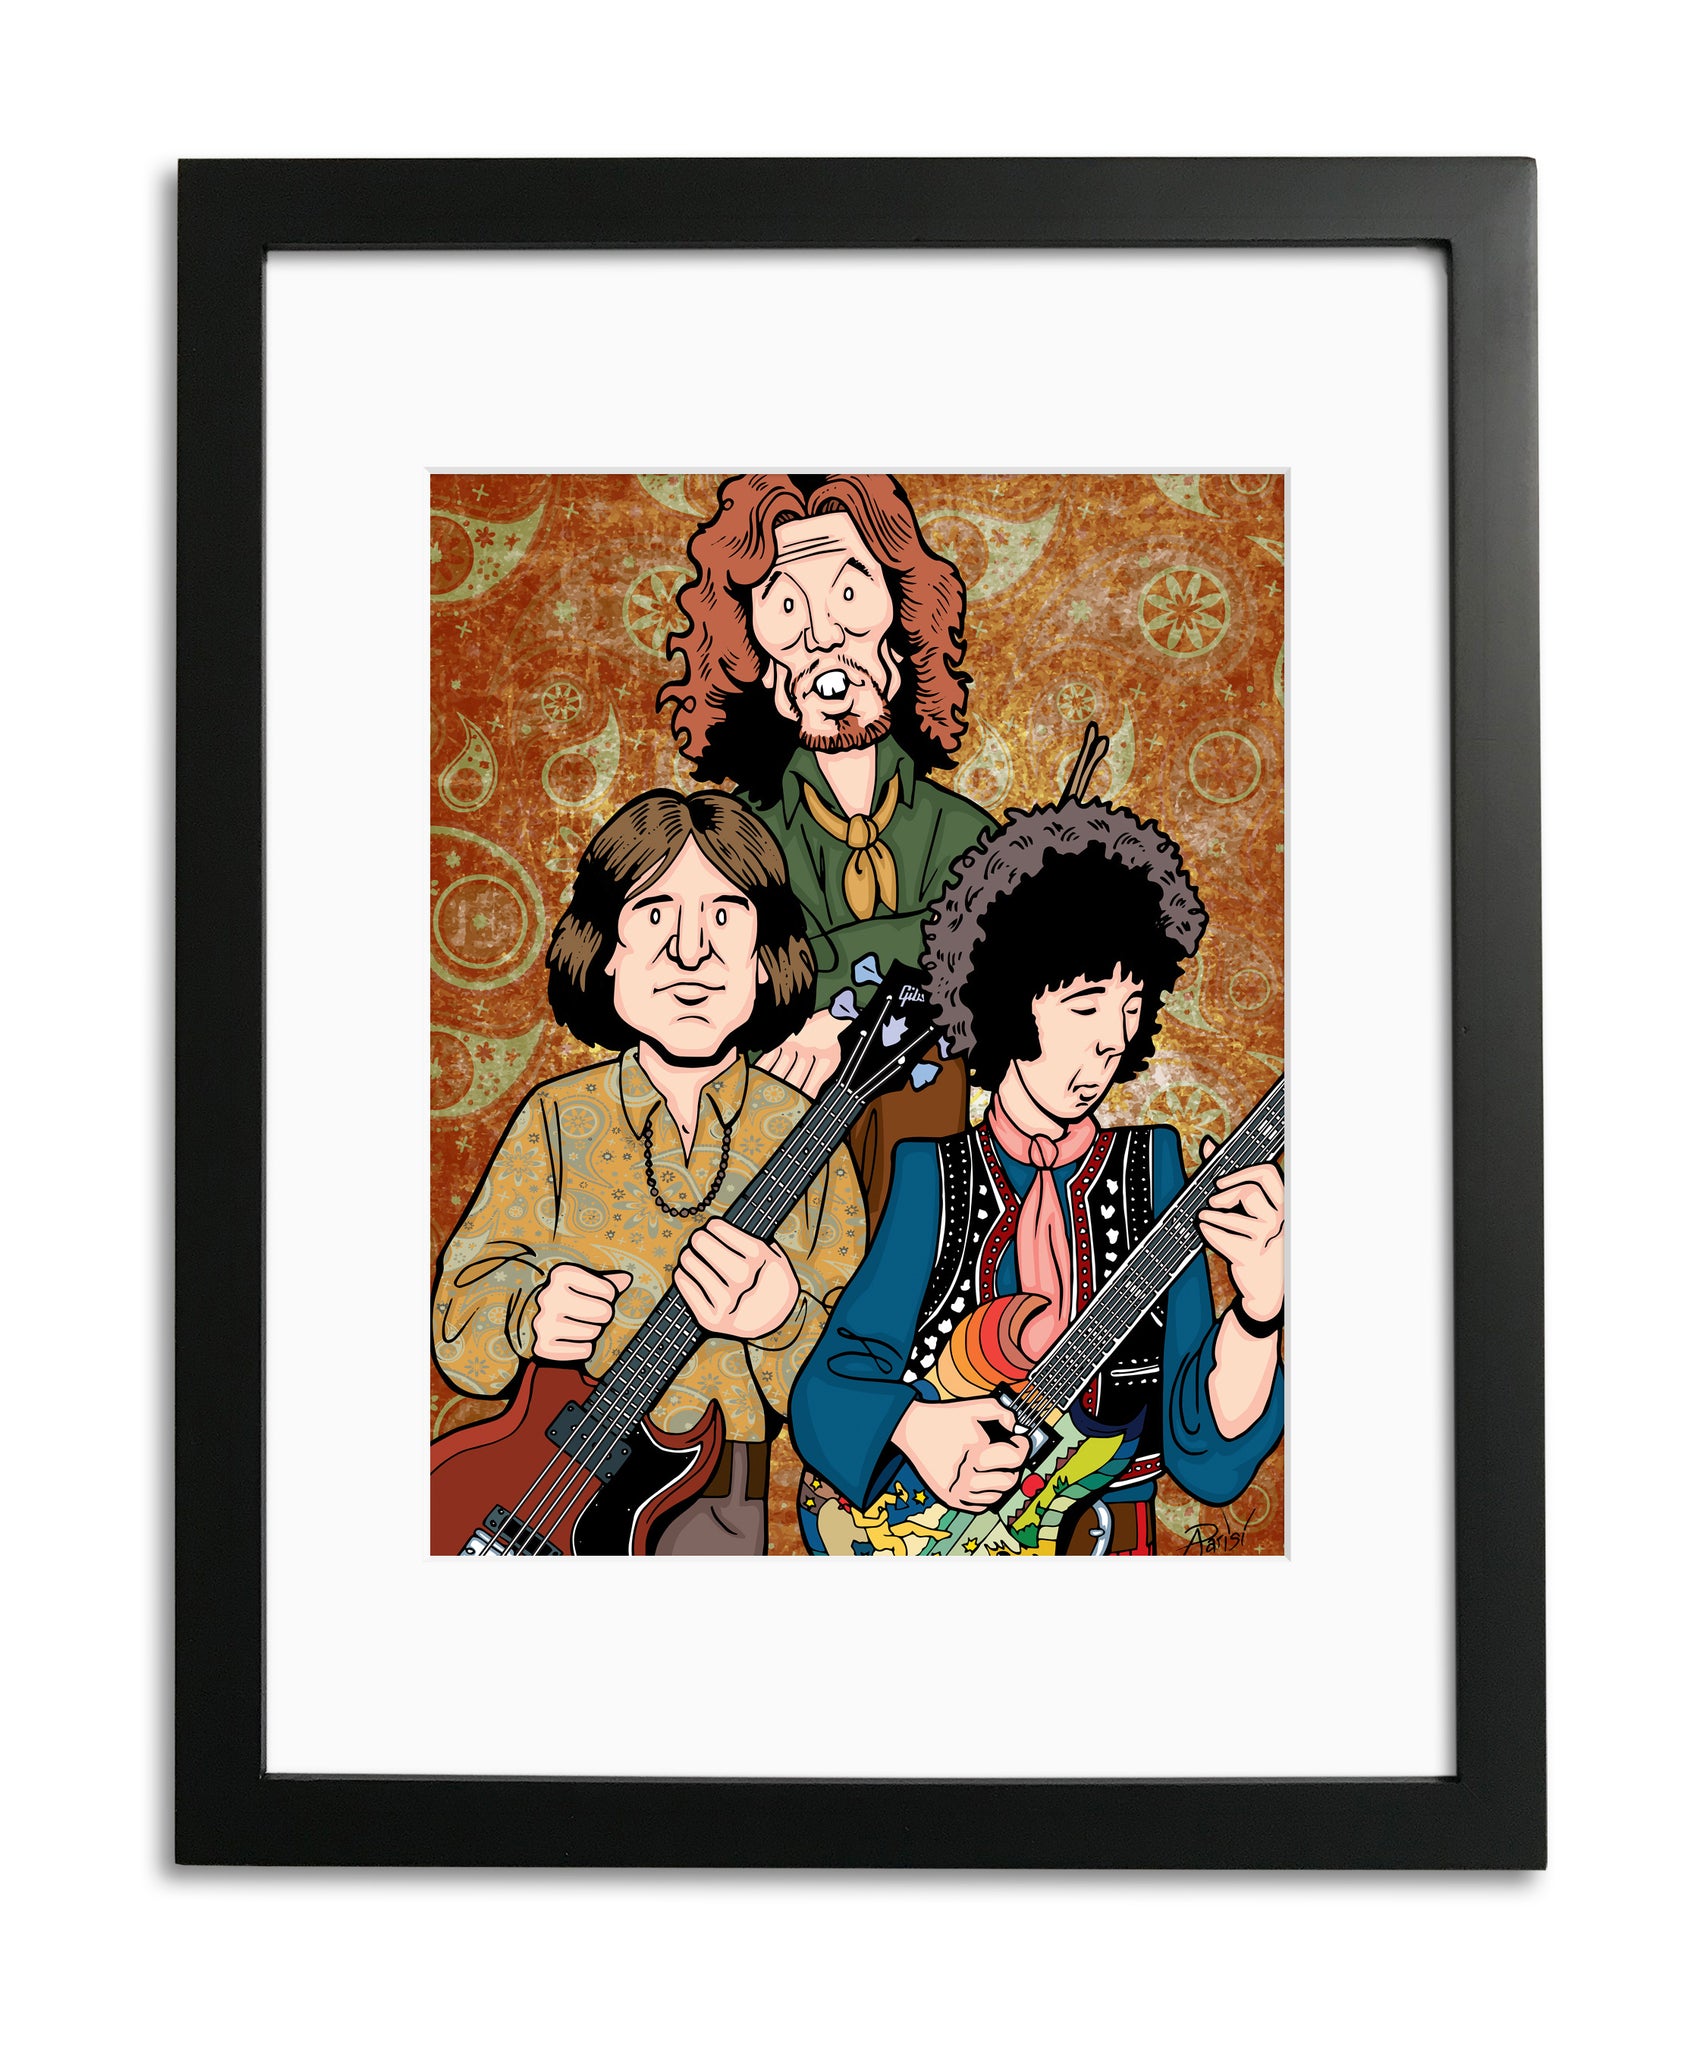 Cream by Anthony Parisi, Limited Edition Print